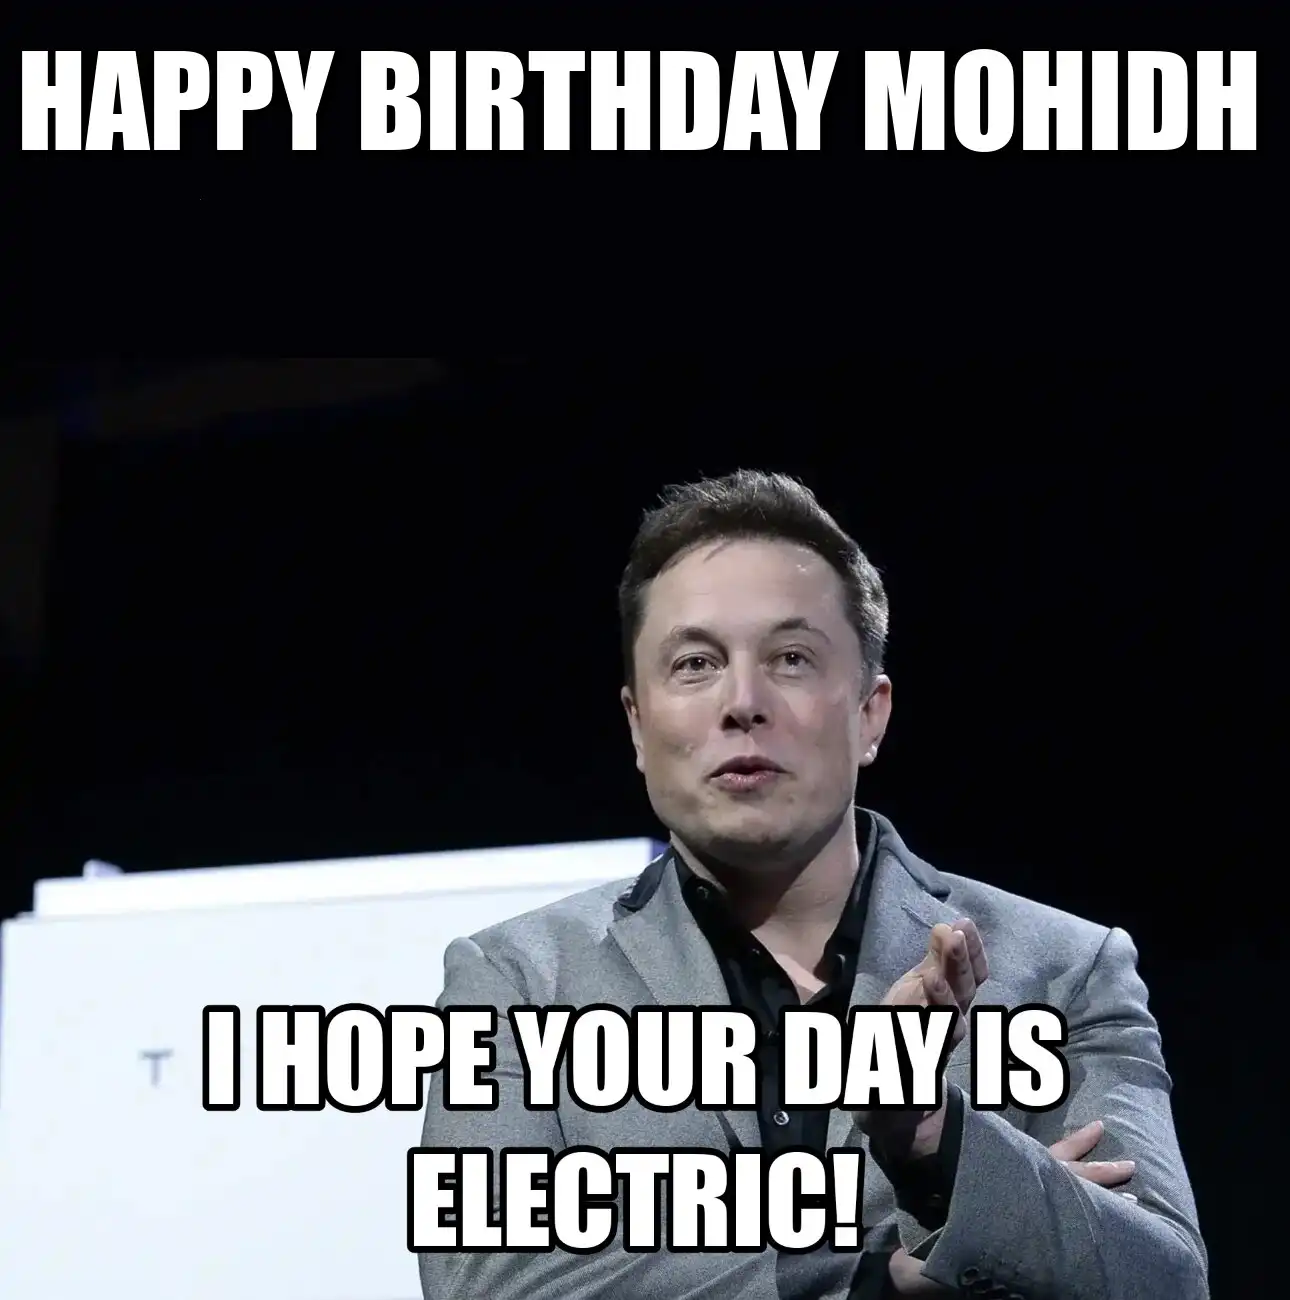 Happy Birthday Mohidh I Hope Your Day Is Electric Meme